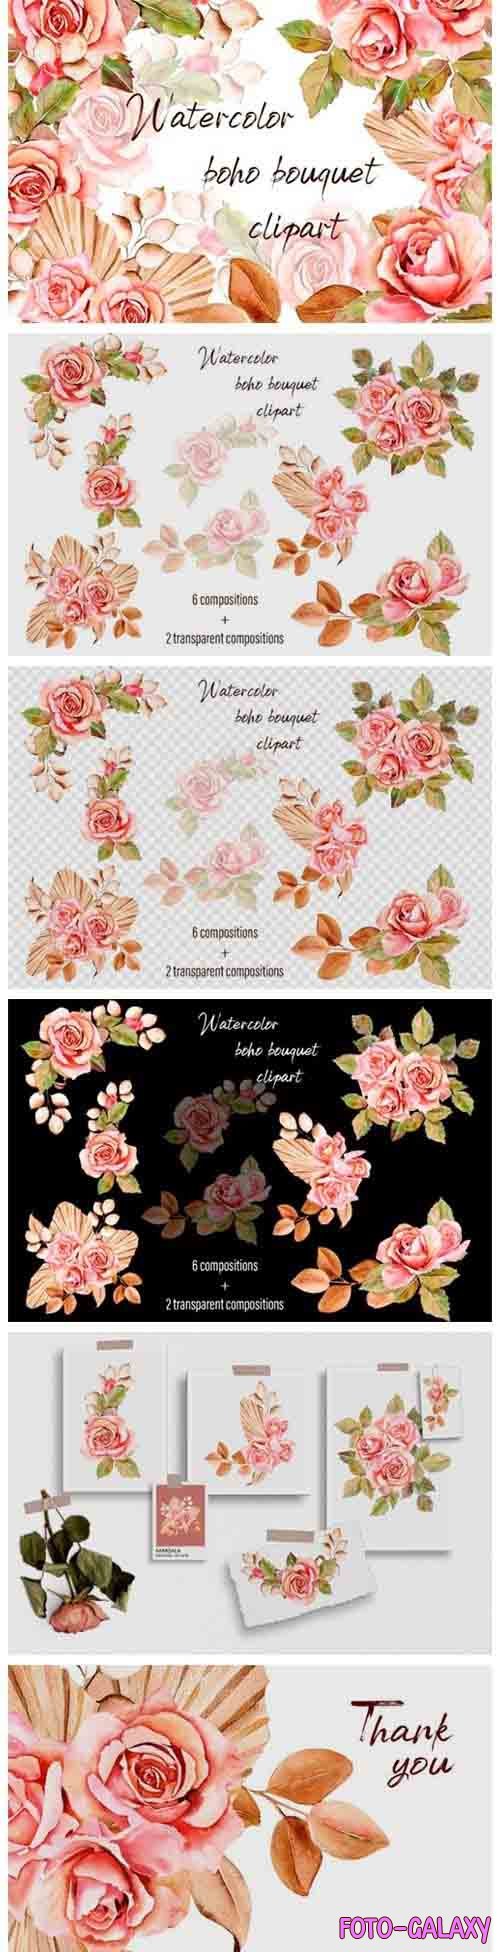 Watercolor bouquet pink roses - 1037713